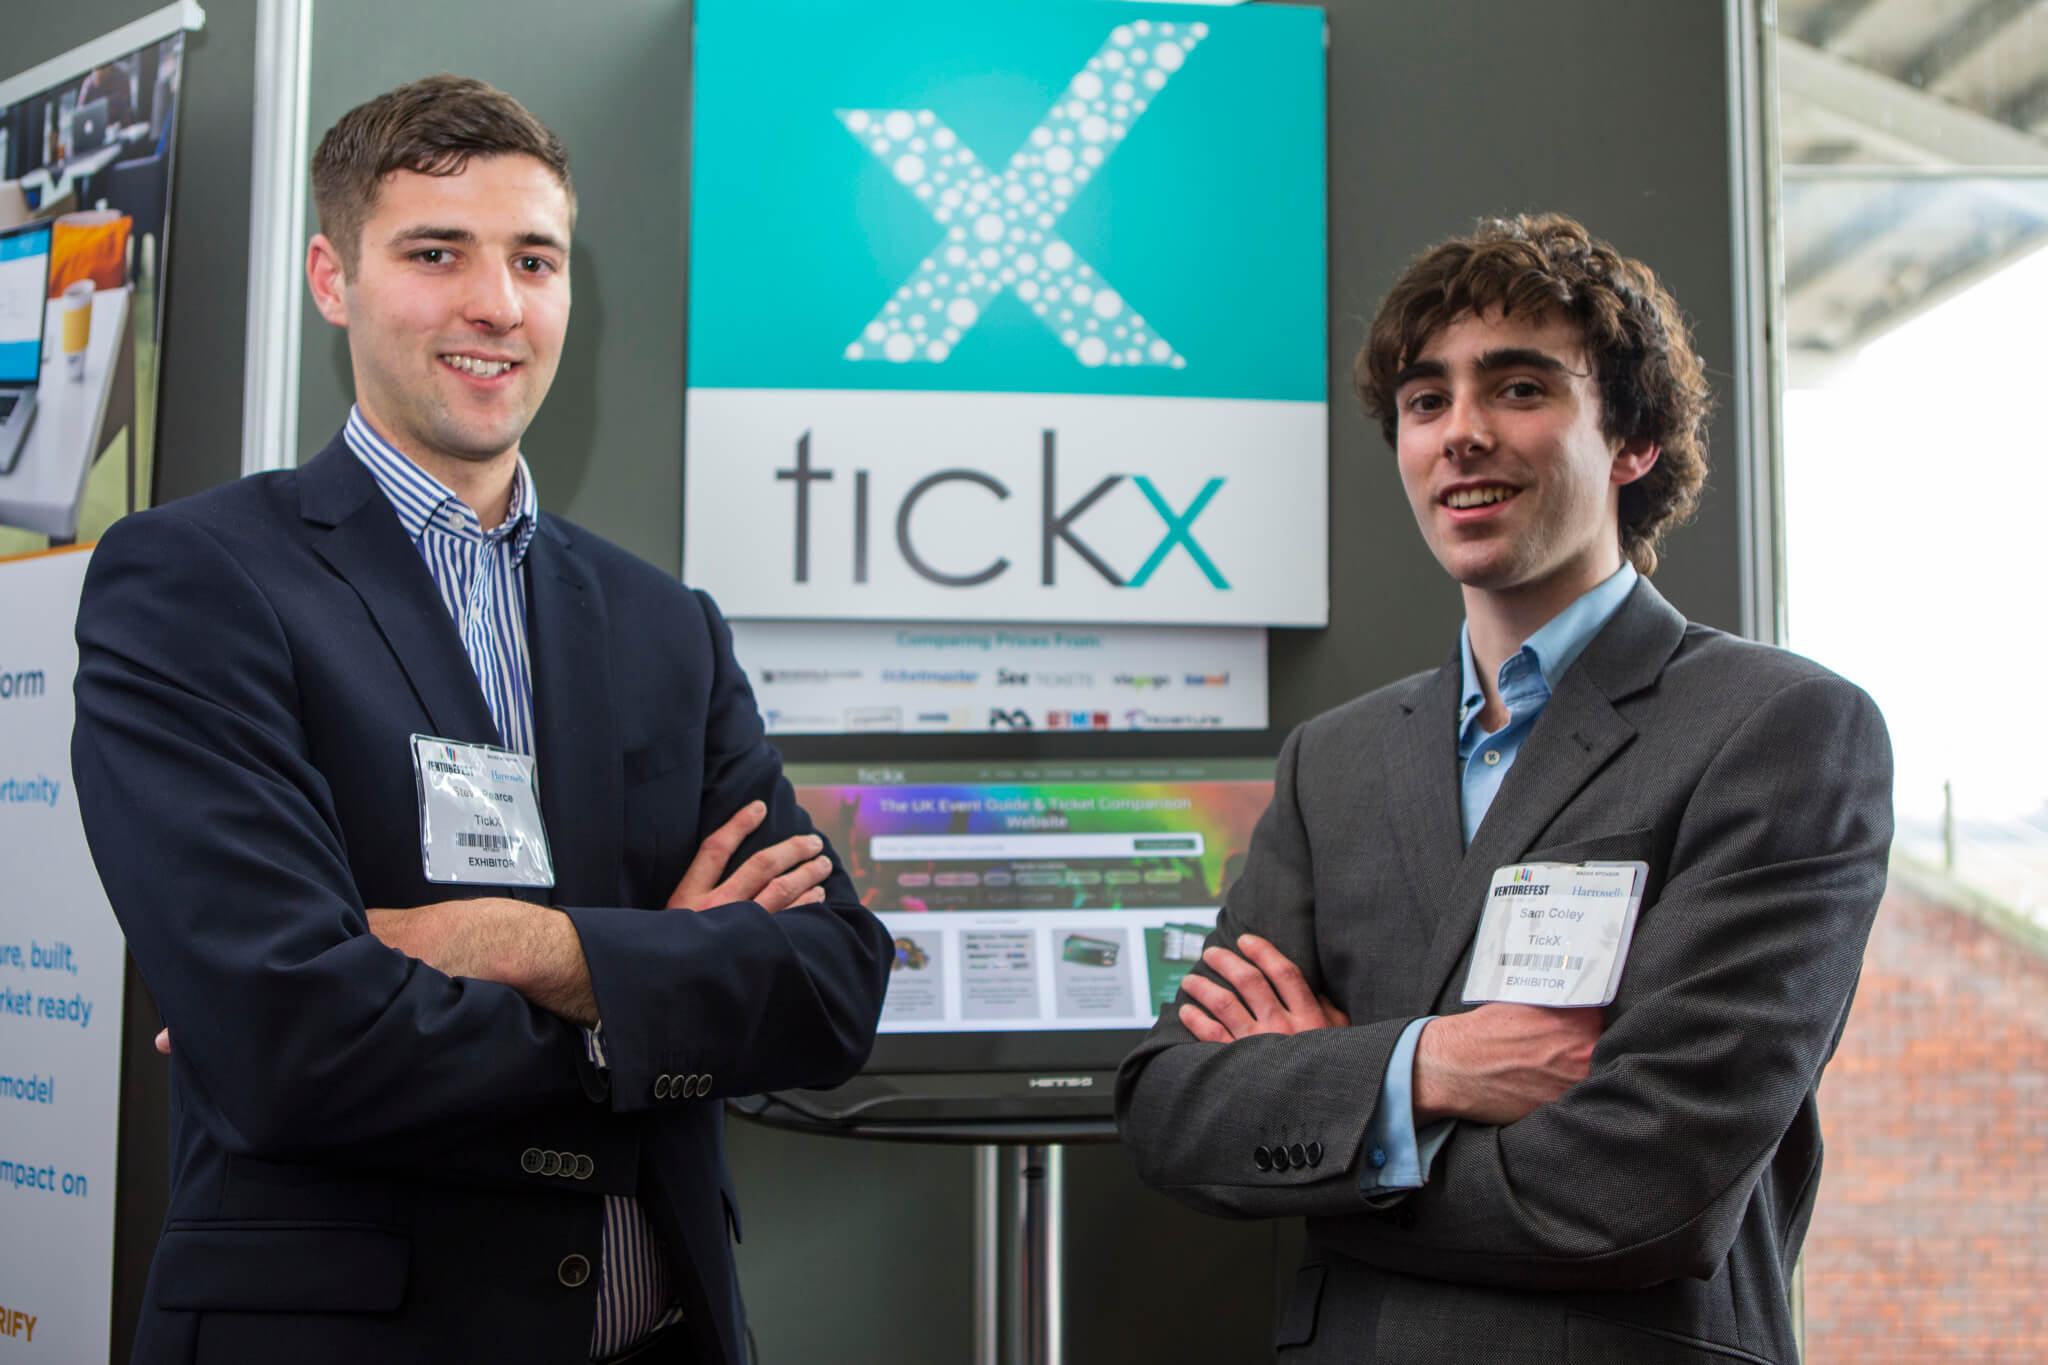 Find the cheapest concert tickets with TickX